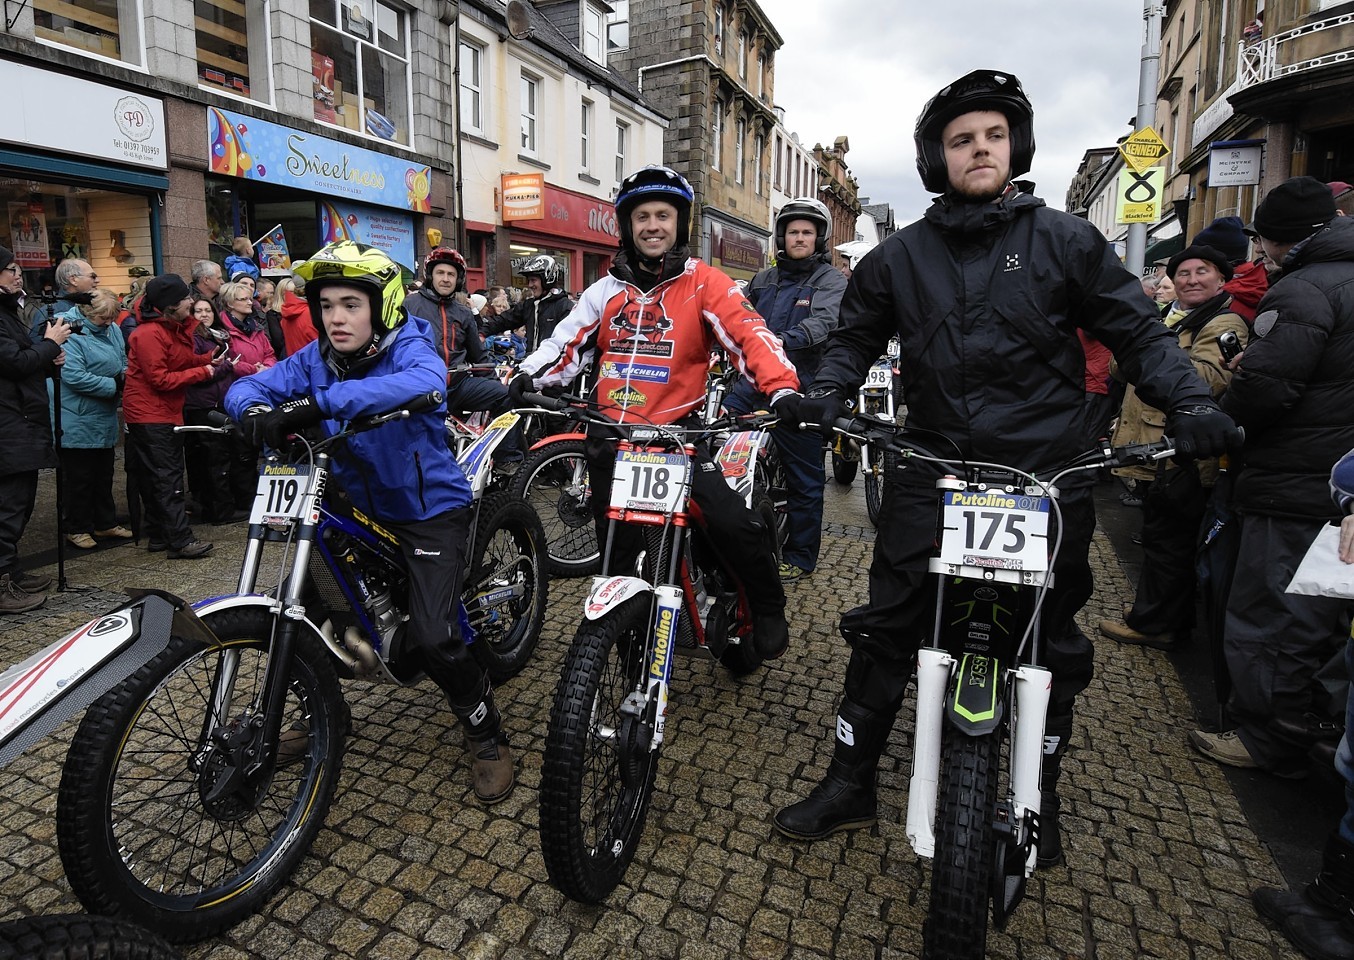 Experienced local rider and trophy hopeful, Gary MacDonald (118) Joined fellow Lochaber rider and first timer Duncan MacDonald (119) parades through Fort William High Street alongside Ayrshire’s Craig Houston